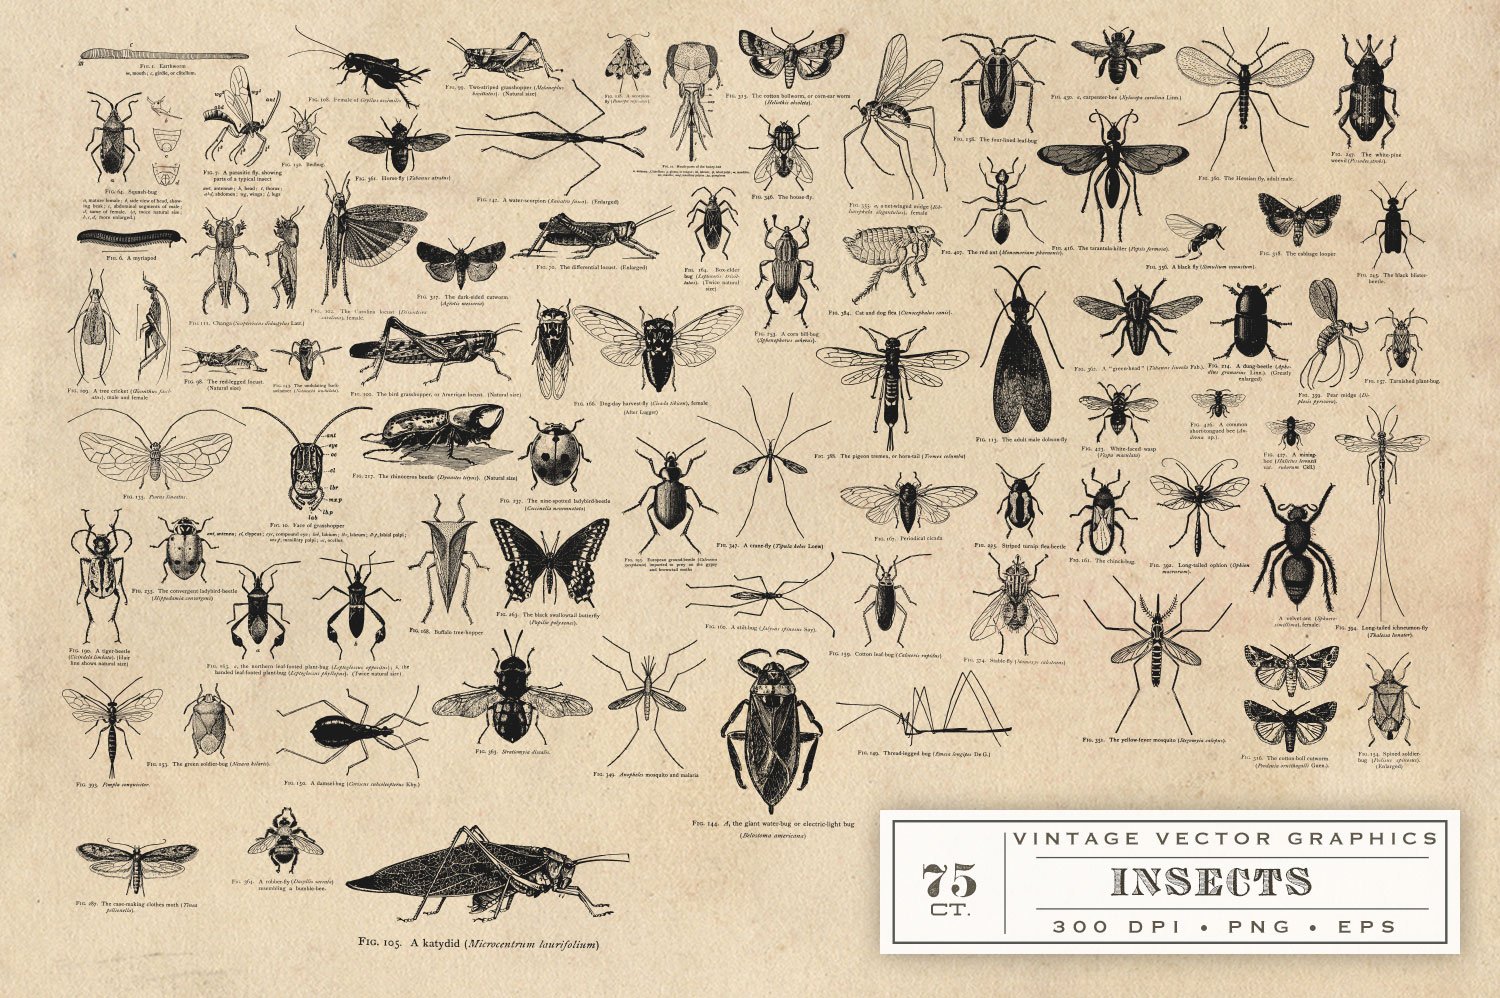 Insect Vector Graphics